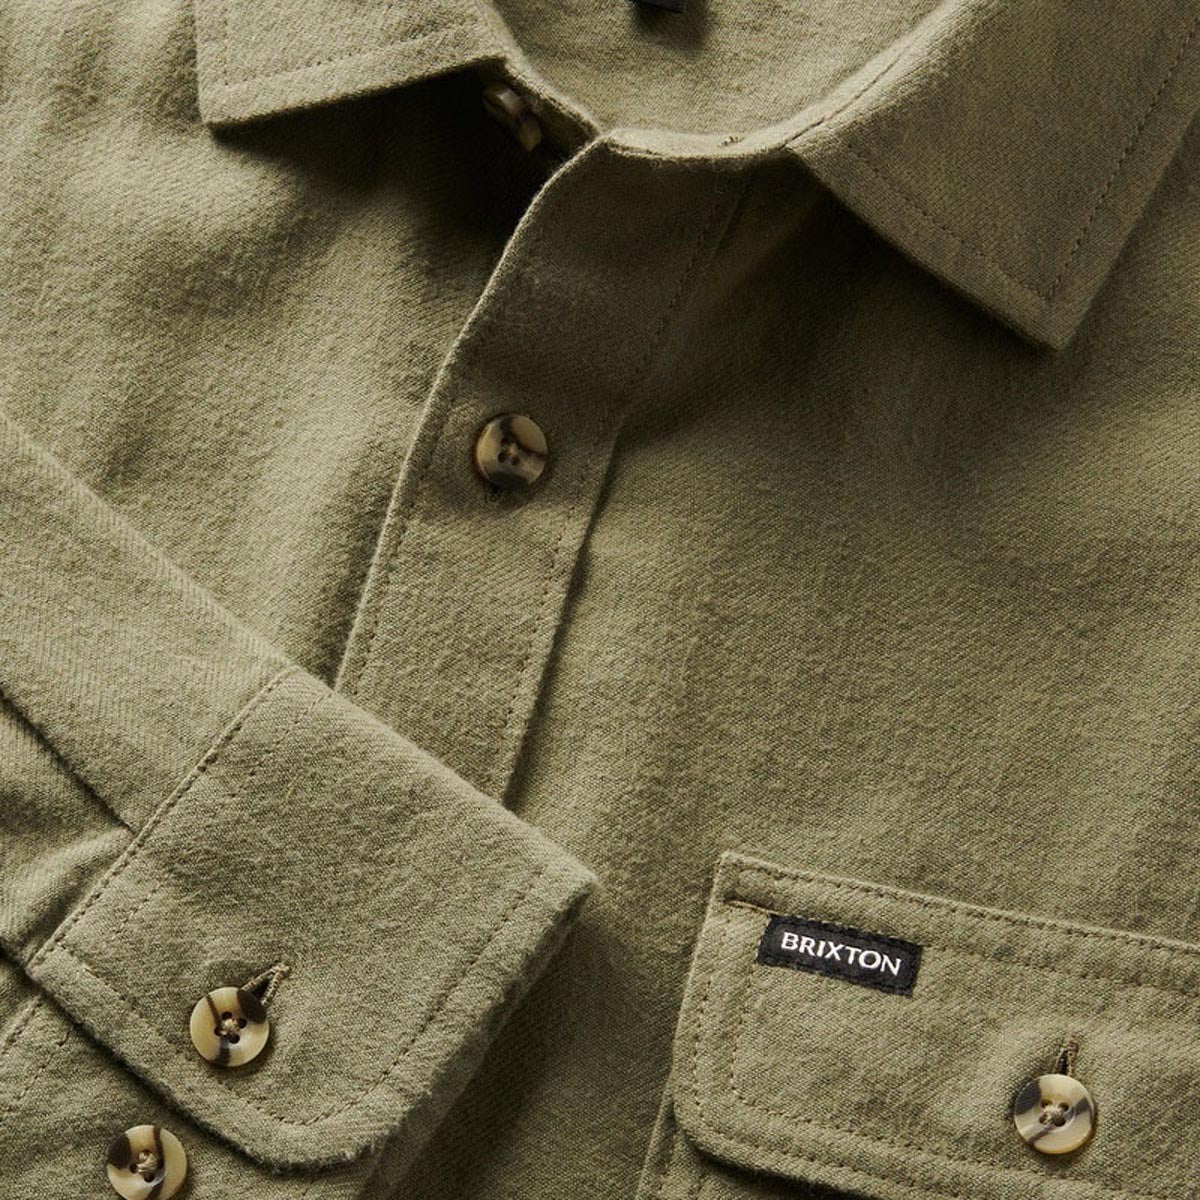 Brixton Bowery Lw Ultra Flannel Shirt - Olive Surplus image 3